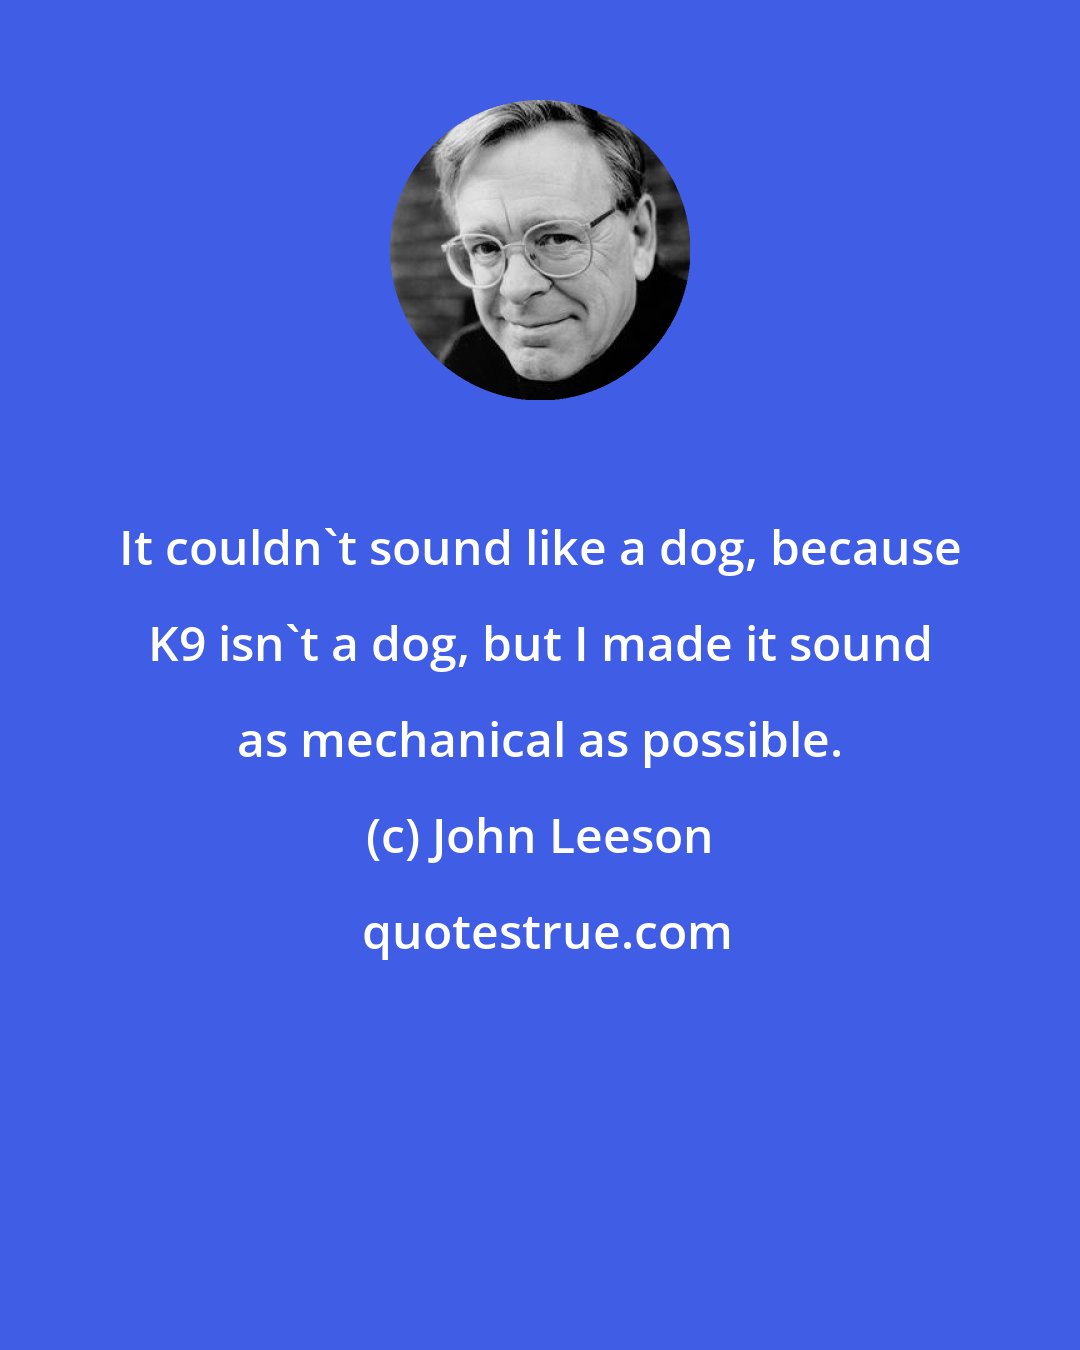 John Leeson: It couldn't sound like a dog, because K9 isn't a dog, but I made it sound as mechanical as possible.